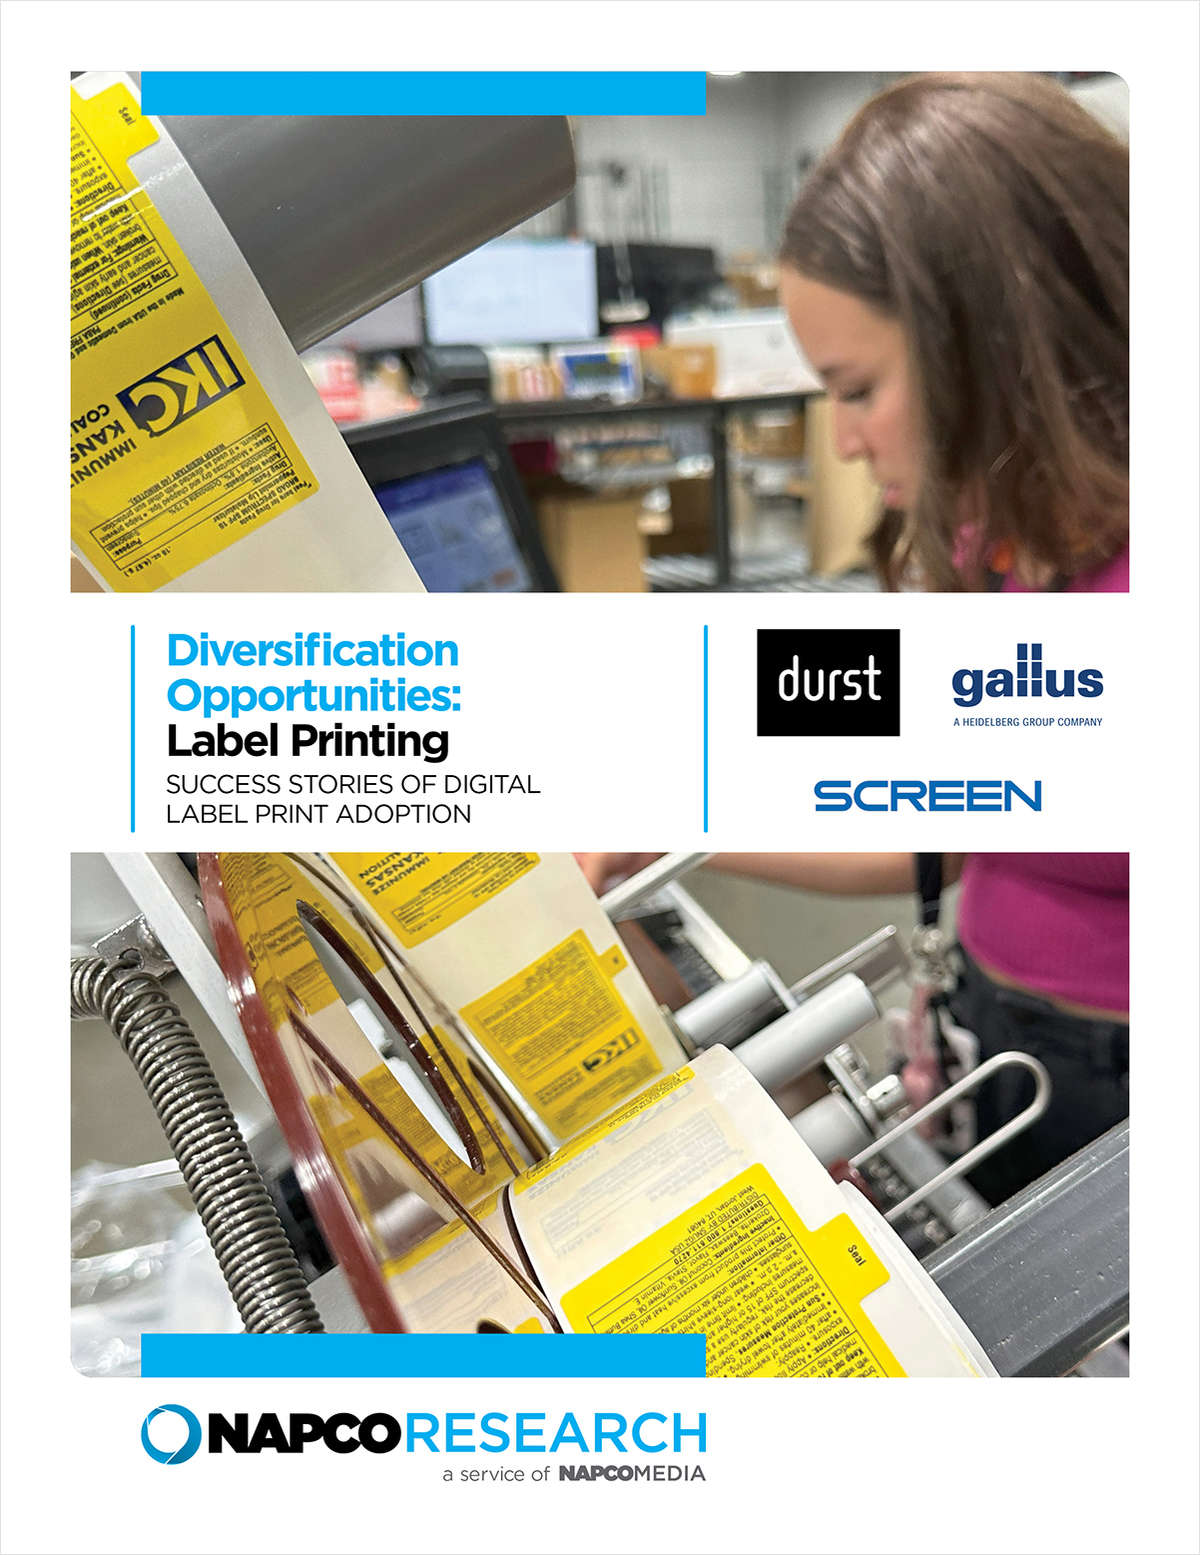 Diversification Opportunities: Label Printing